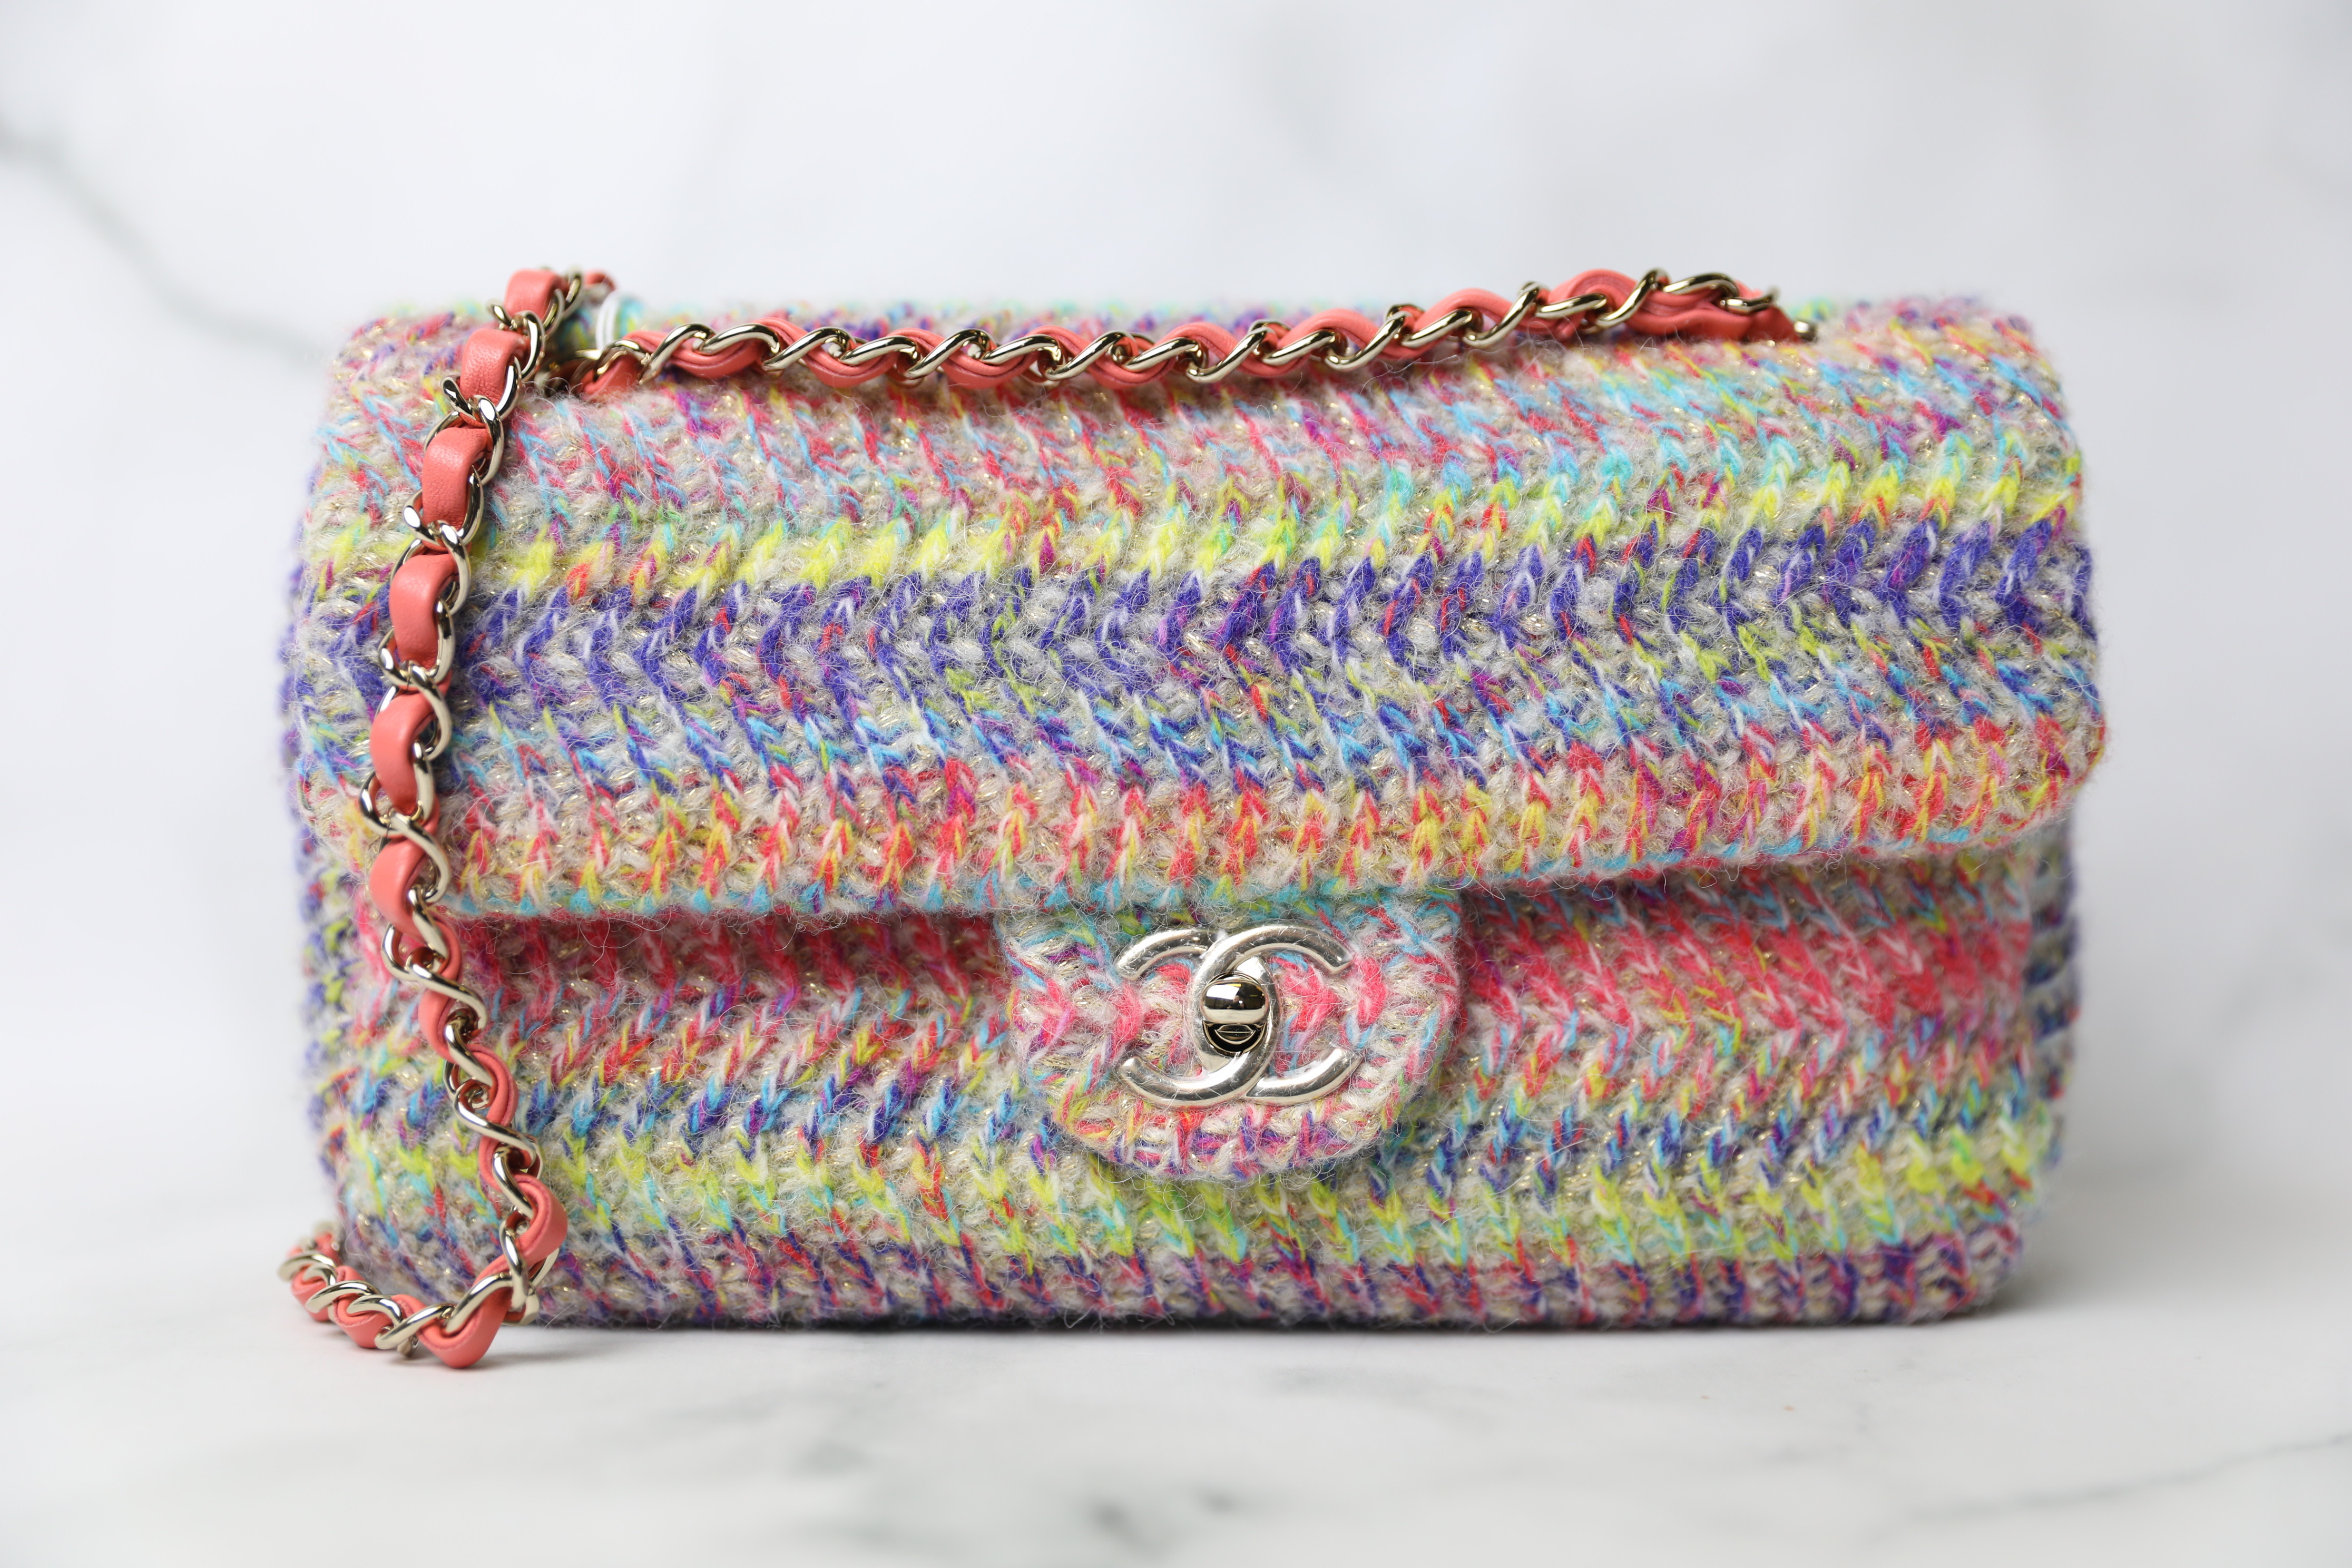 Chanel Rainbow Knit Flap, Silver Hardware, New in Dustbag WA001